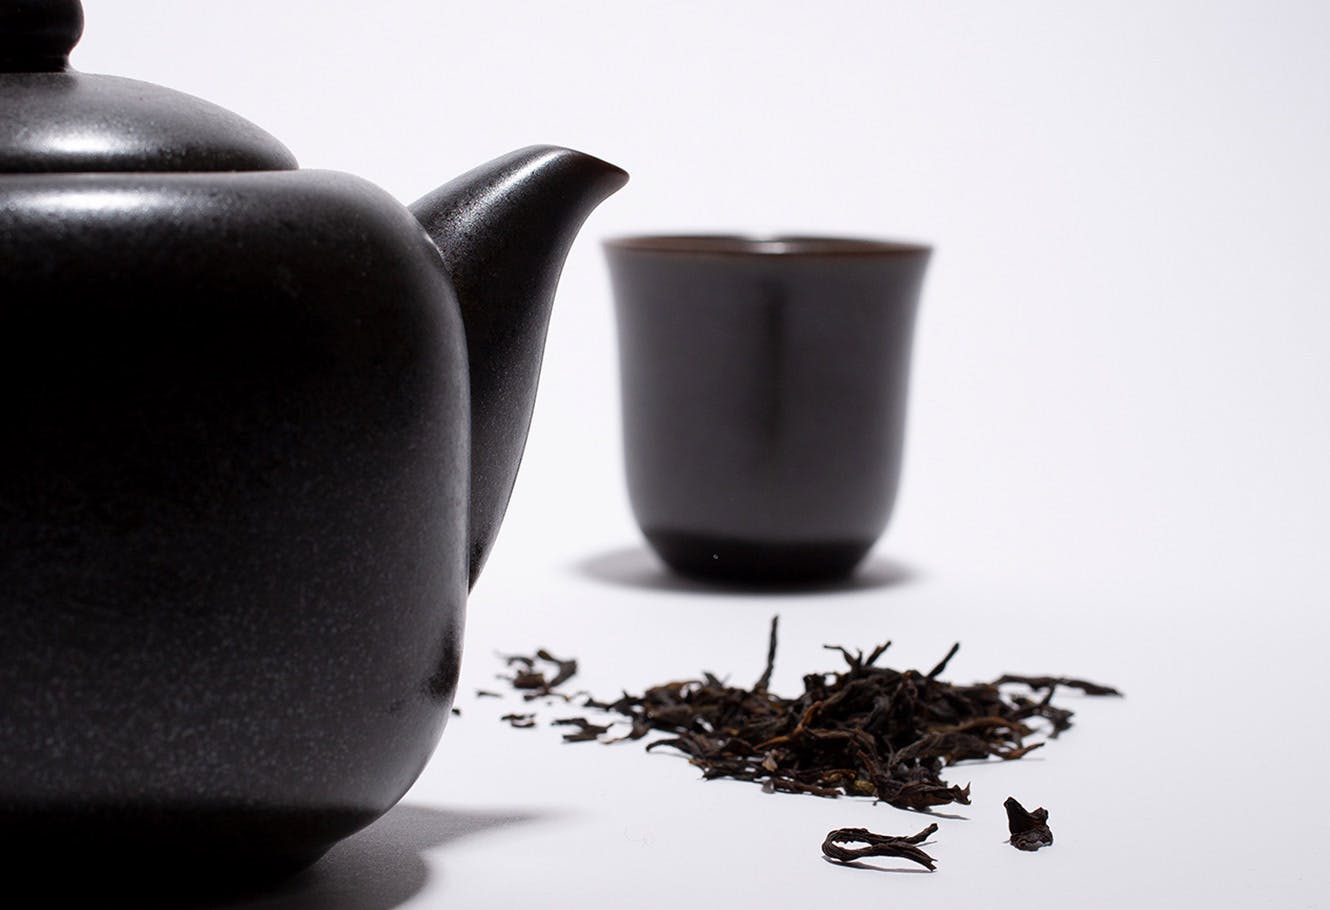 Japanese smoked tea leaves in bulk with a black cup and a black teapot.